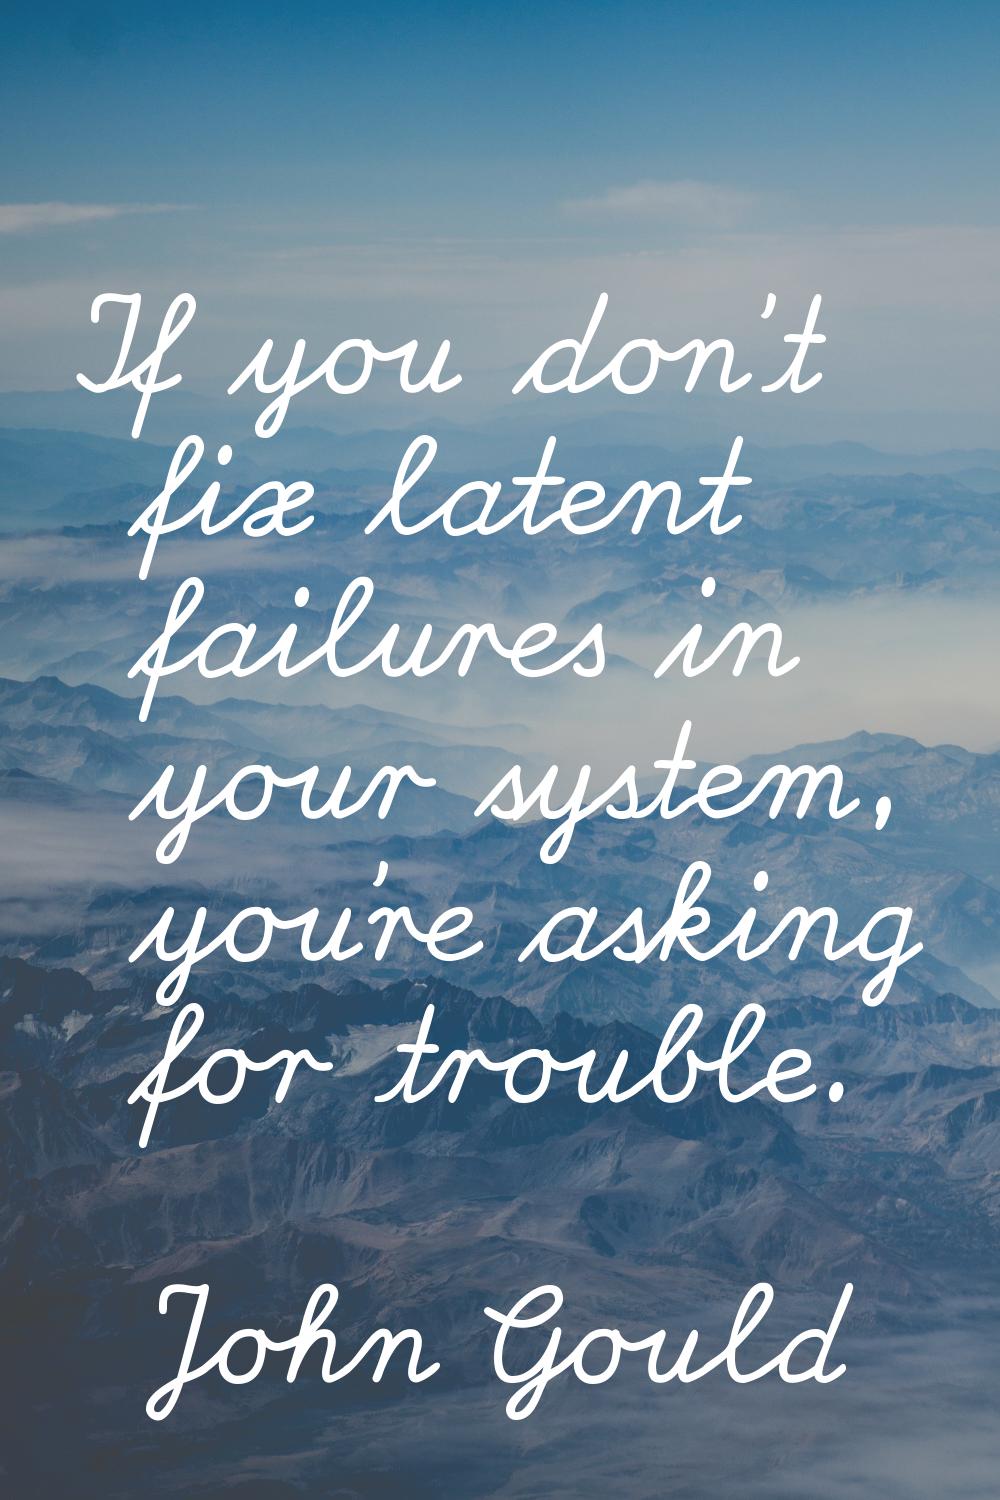 If you don't fix latent failures in your system, you're asking for trouble.